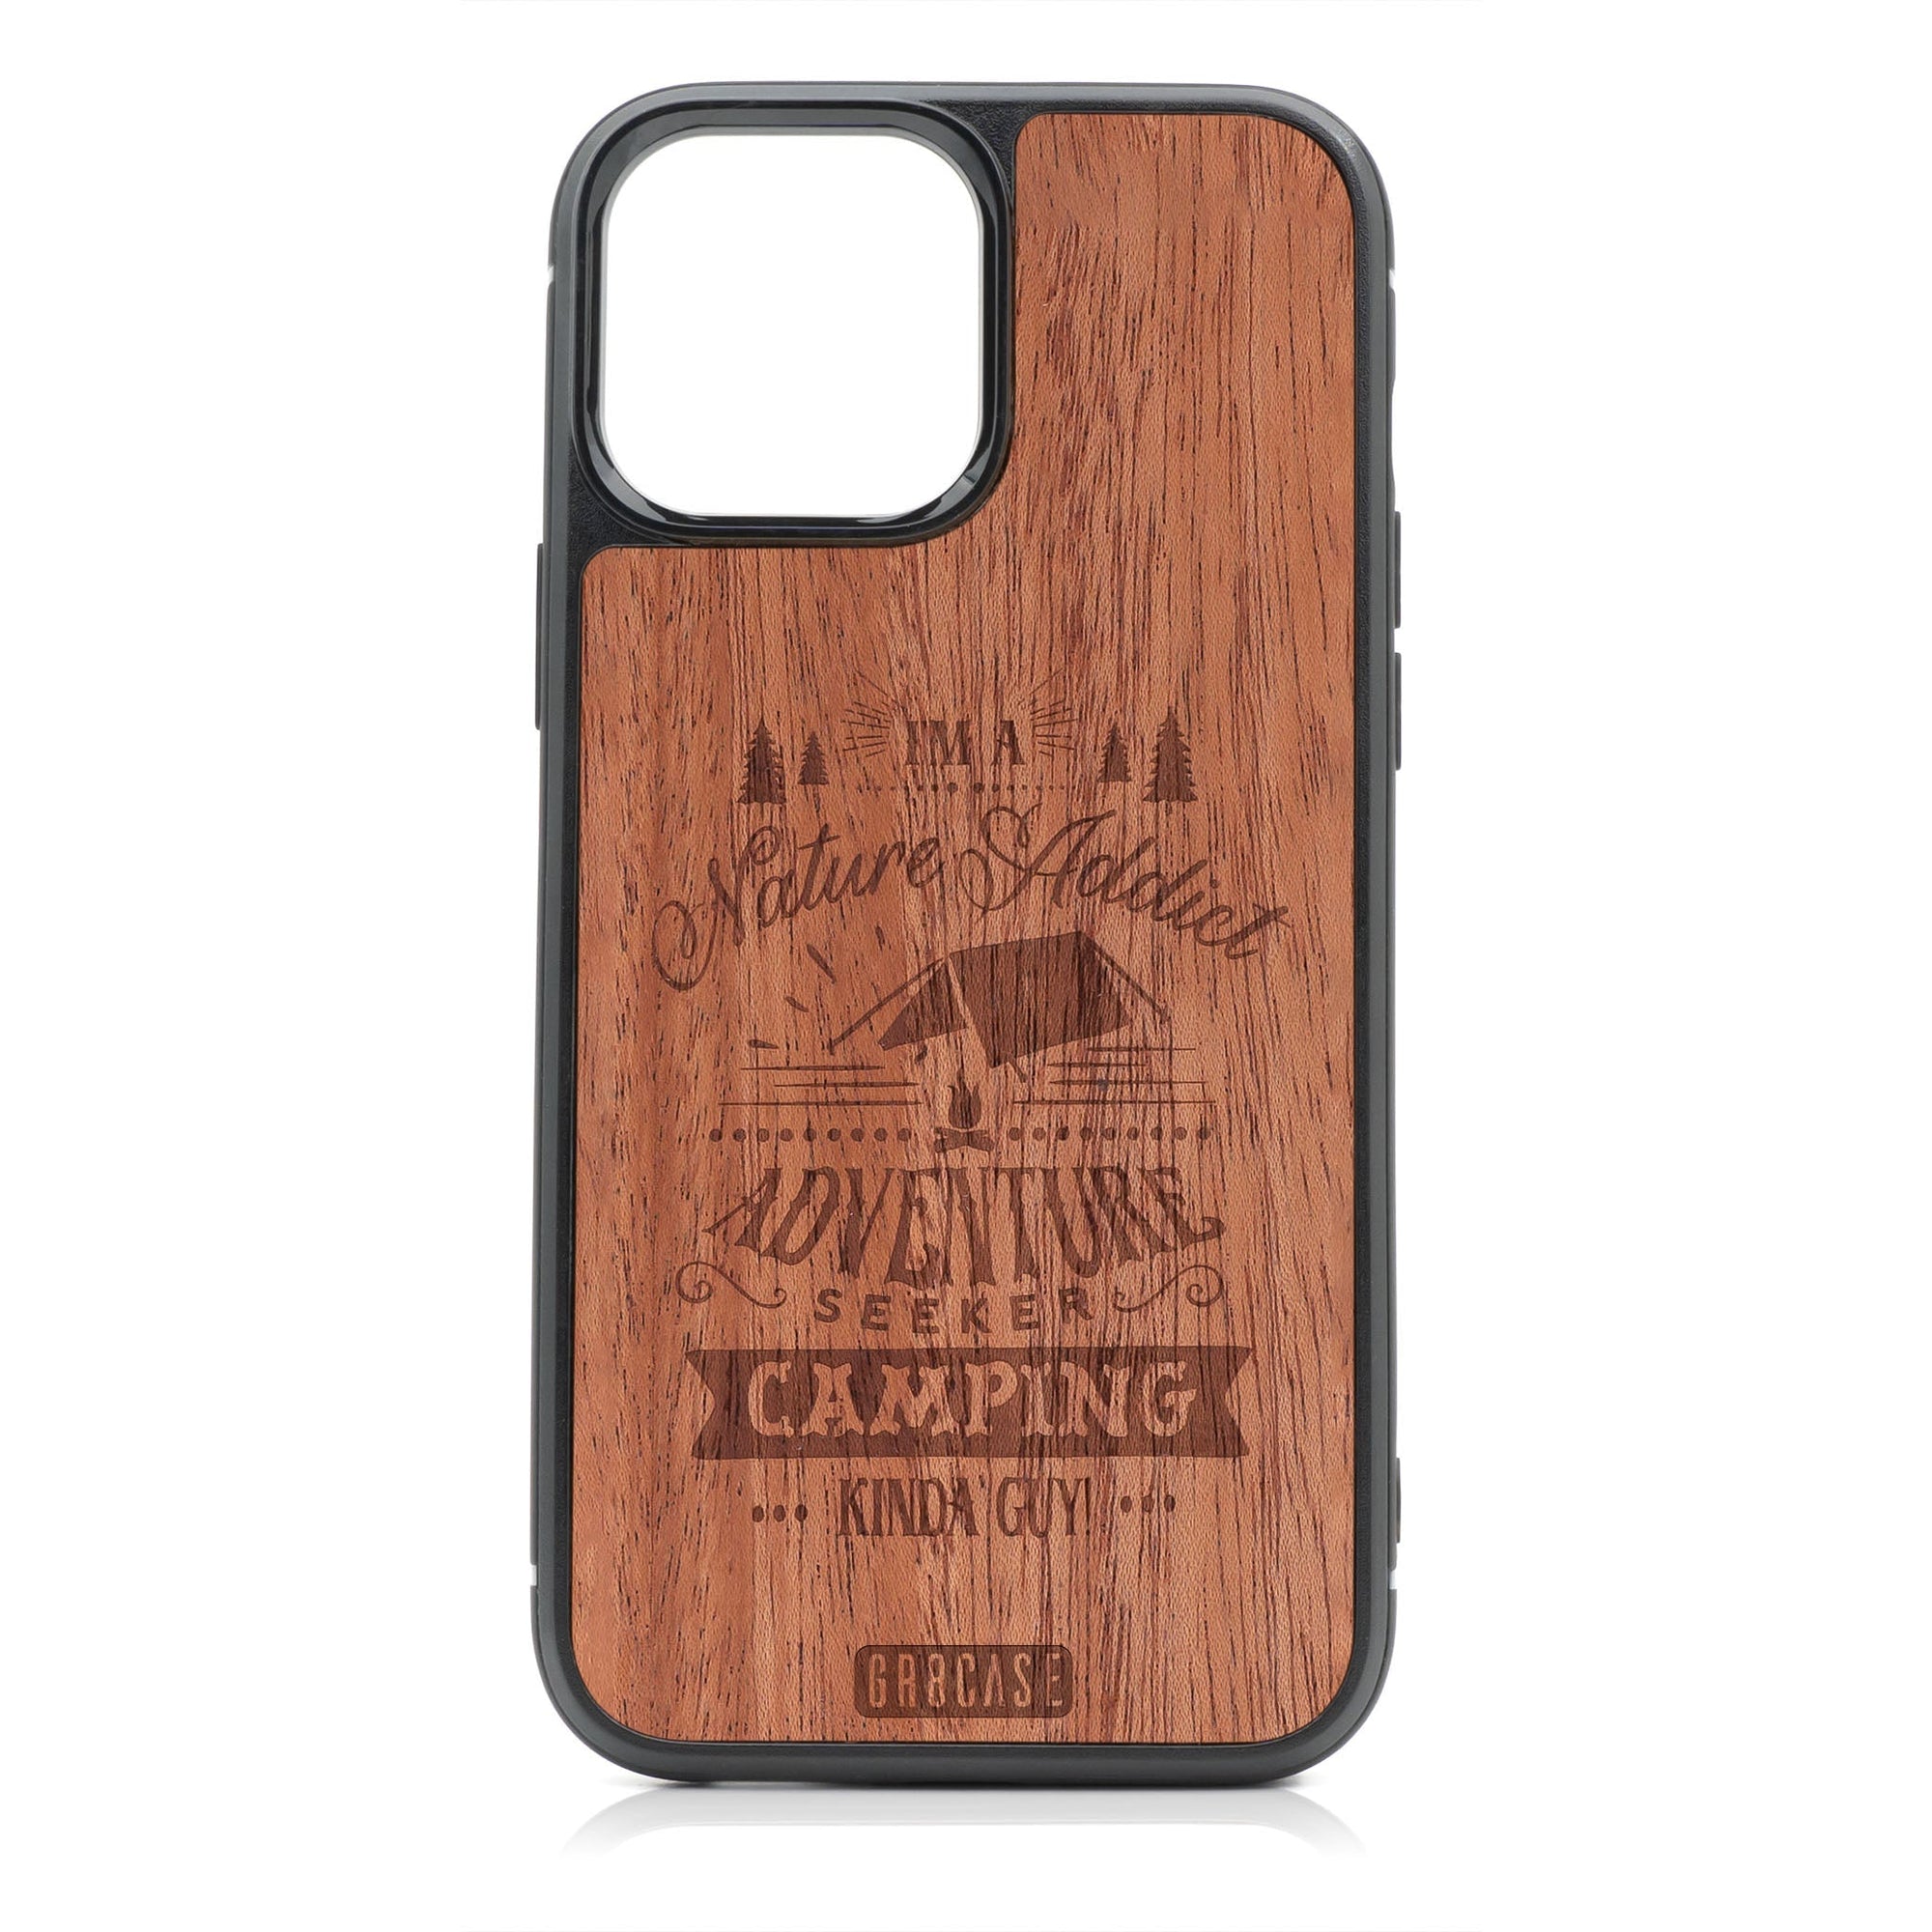 I'm A Nature Addict Adventure Seeker Camping Kinda Guy Design Wood Case For iPhone 15 Pro Max